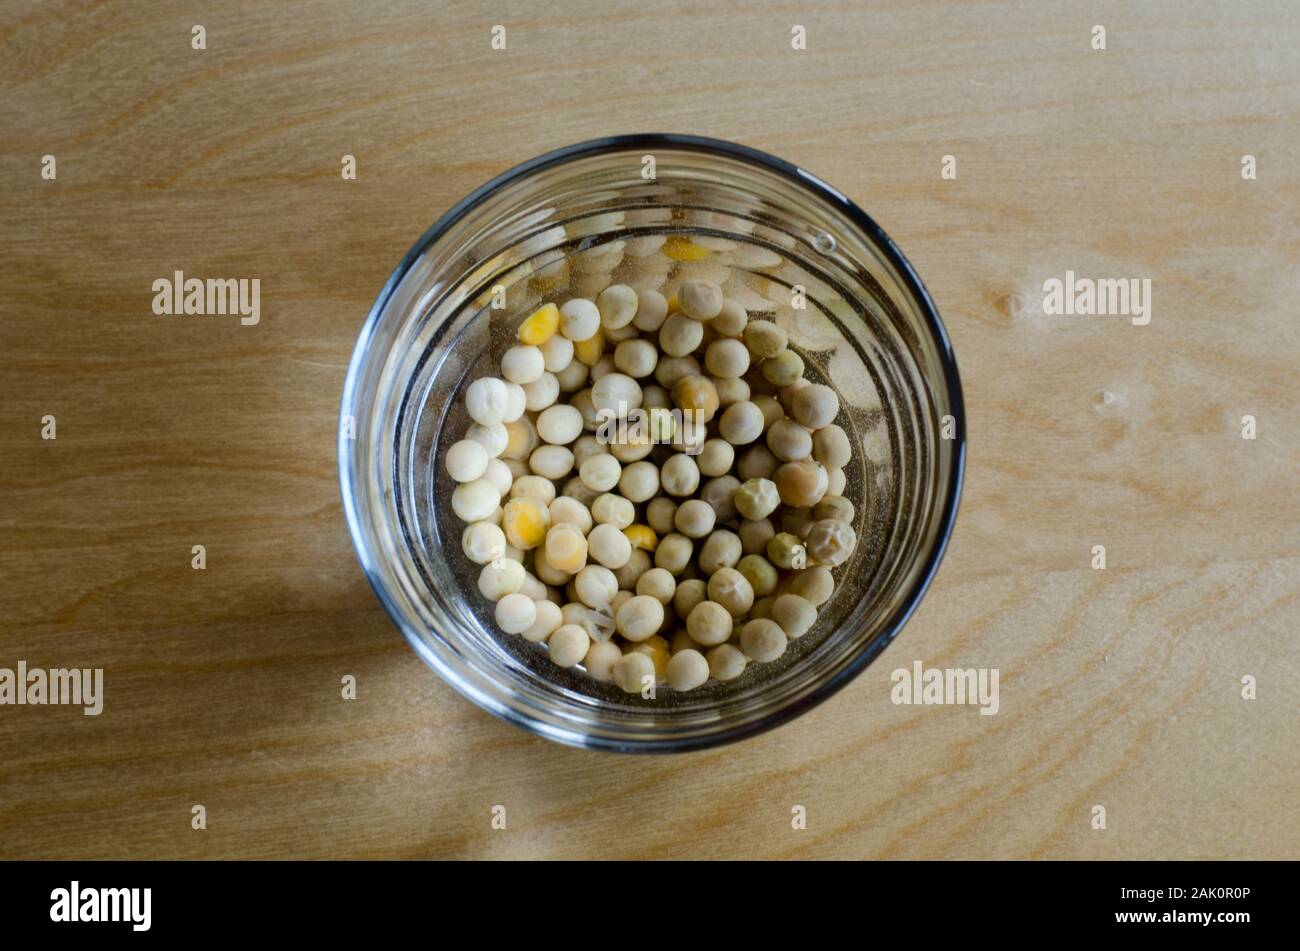 Chickpeas soaking in water in a glass on a wooden table. Focused background Stock Photo